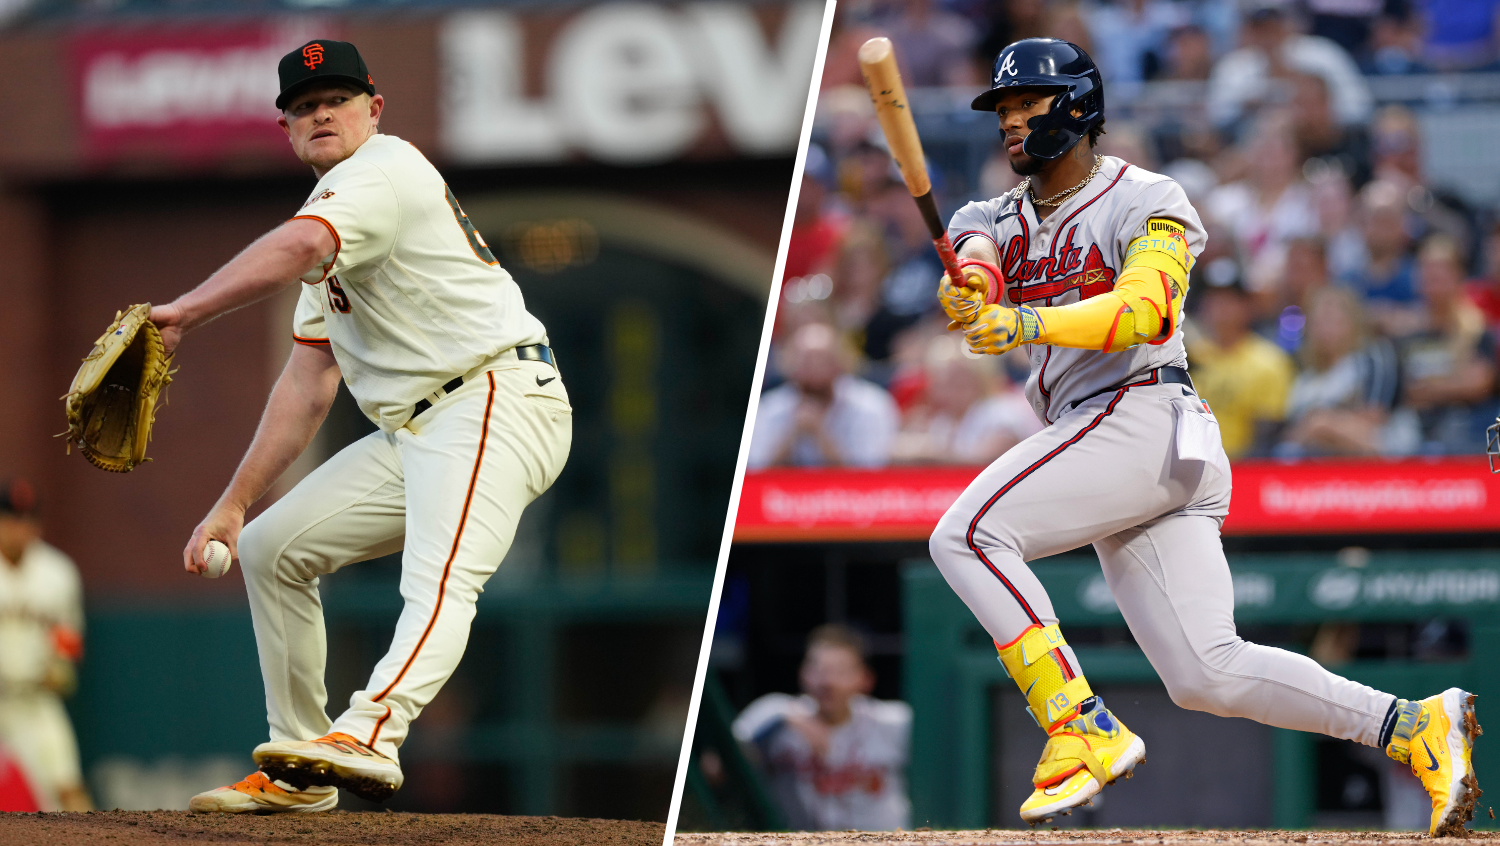 How to watch Giants vs. Braves today – NBC Bay Area